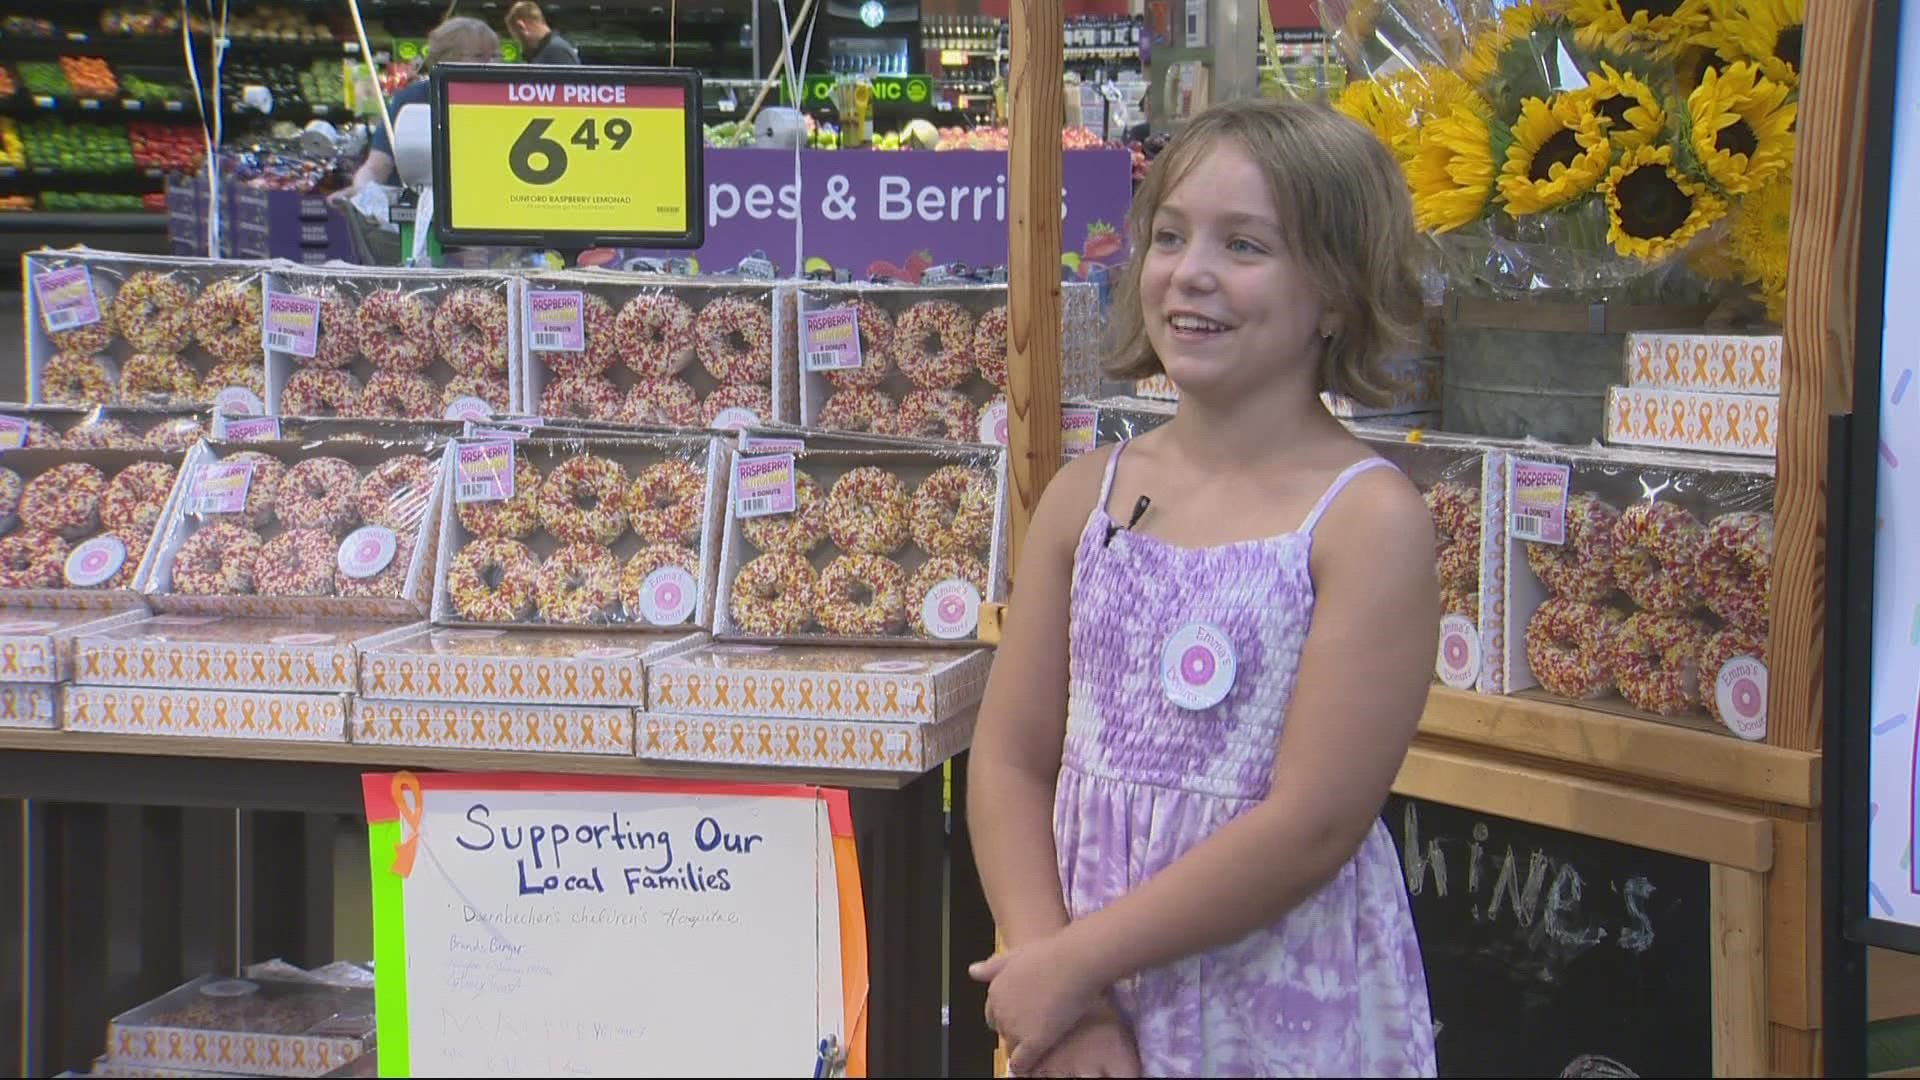 An Albany family and their 9-year-old daughter support kids fighting cancer by selling donuts at local Fred Meyers.